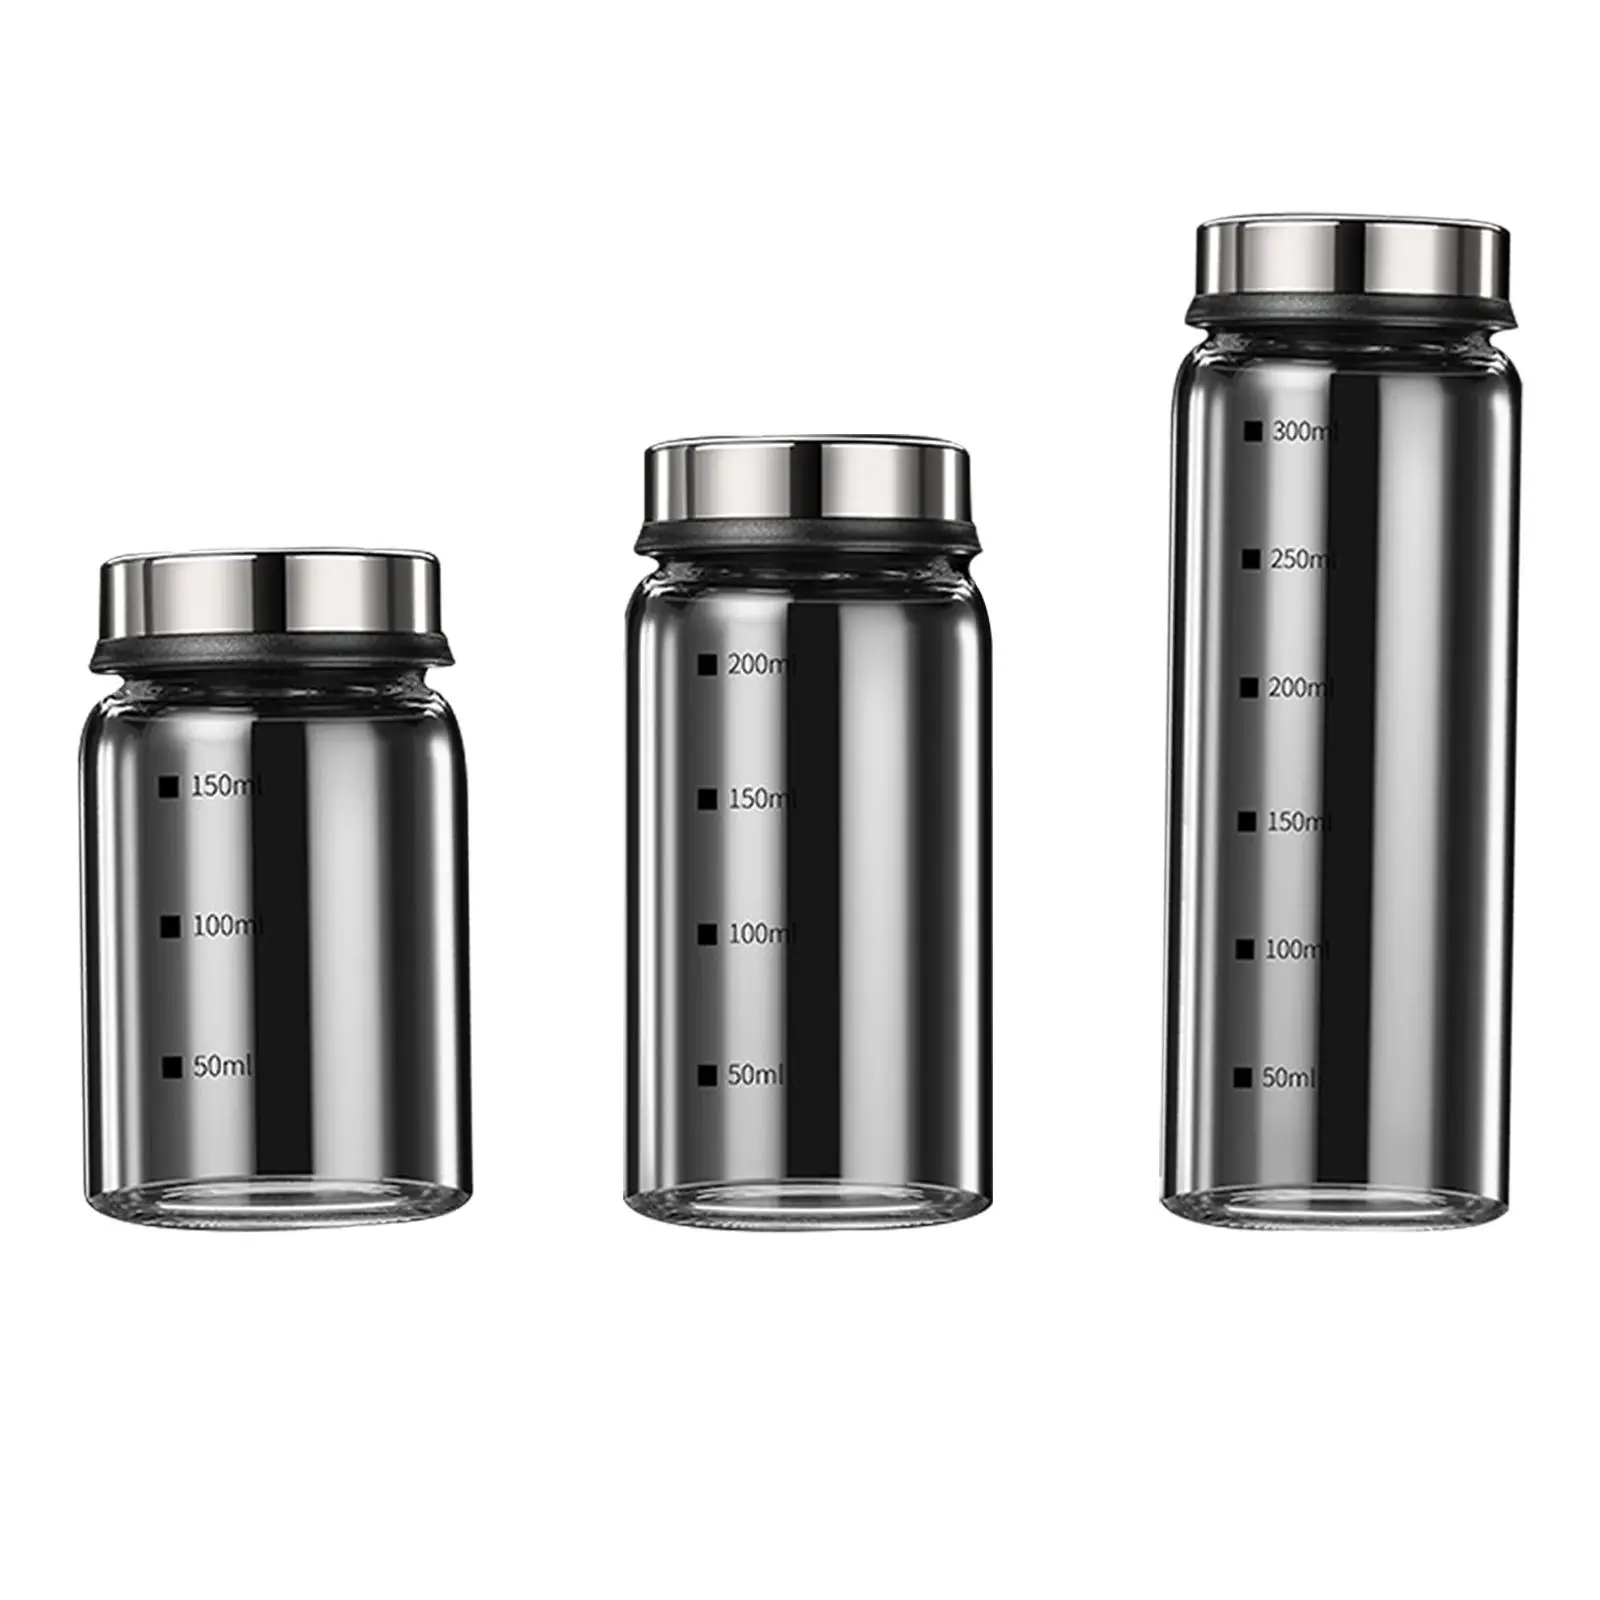 Seasoning Shaker Separable Stainless Steel Adjust Hole Reusable with Rotating Cover Spiral Seasoning for Pepper